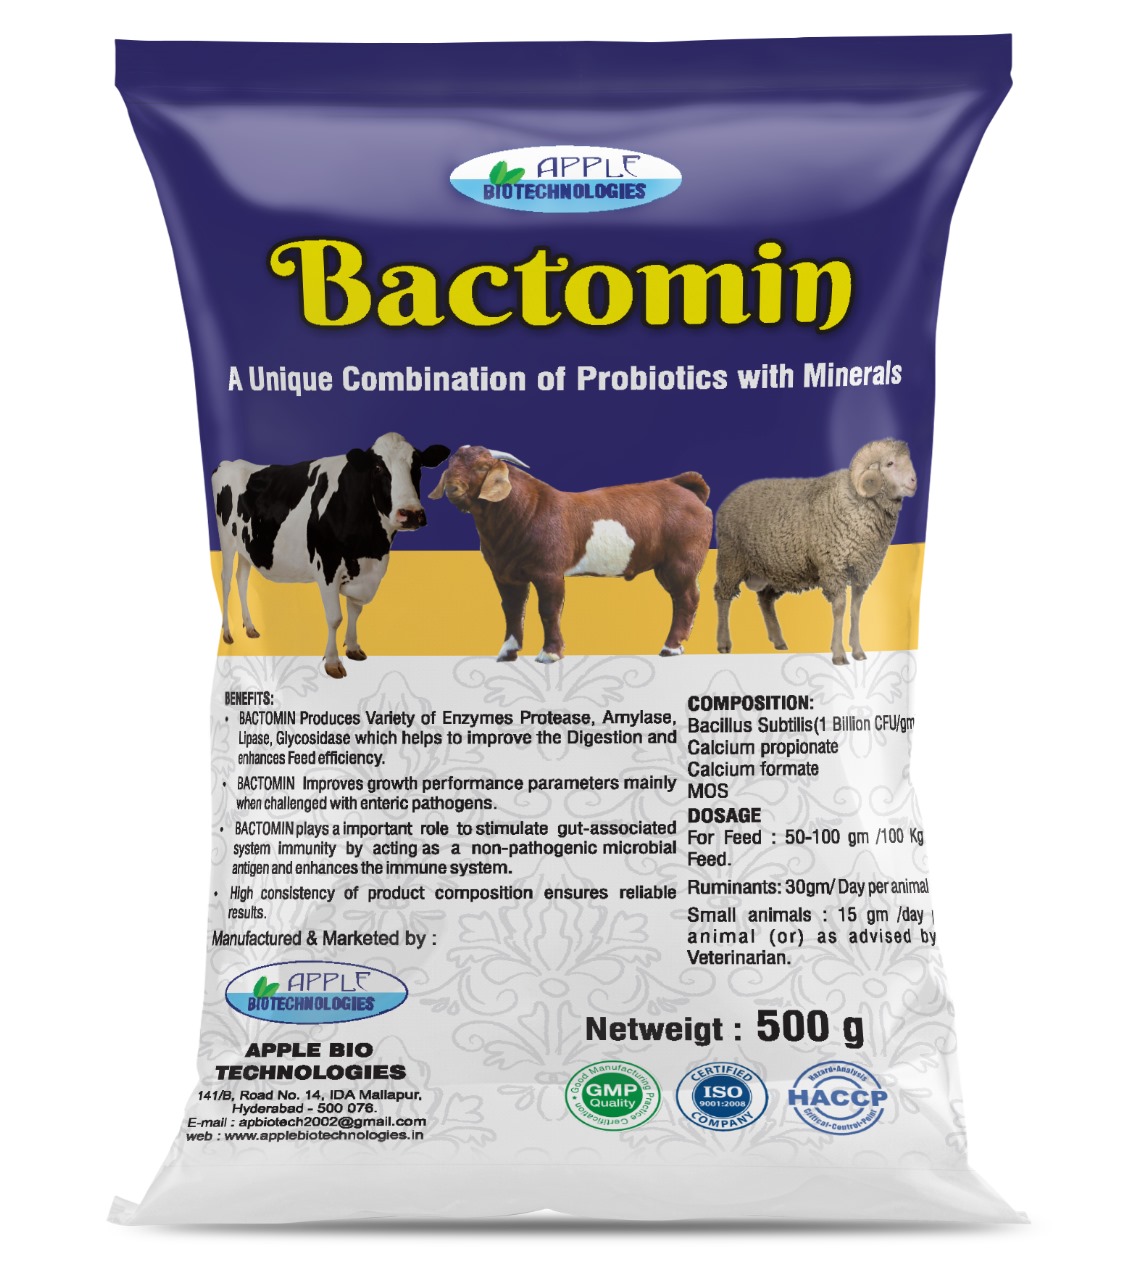 BACTOMIN